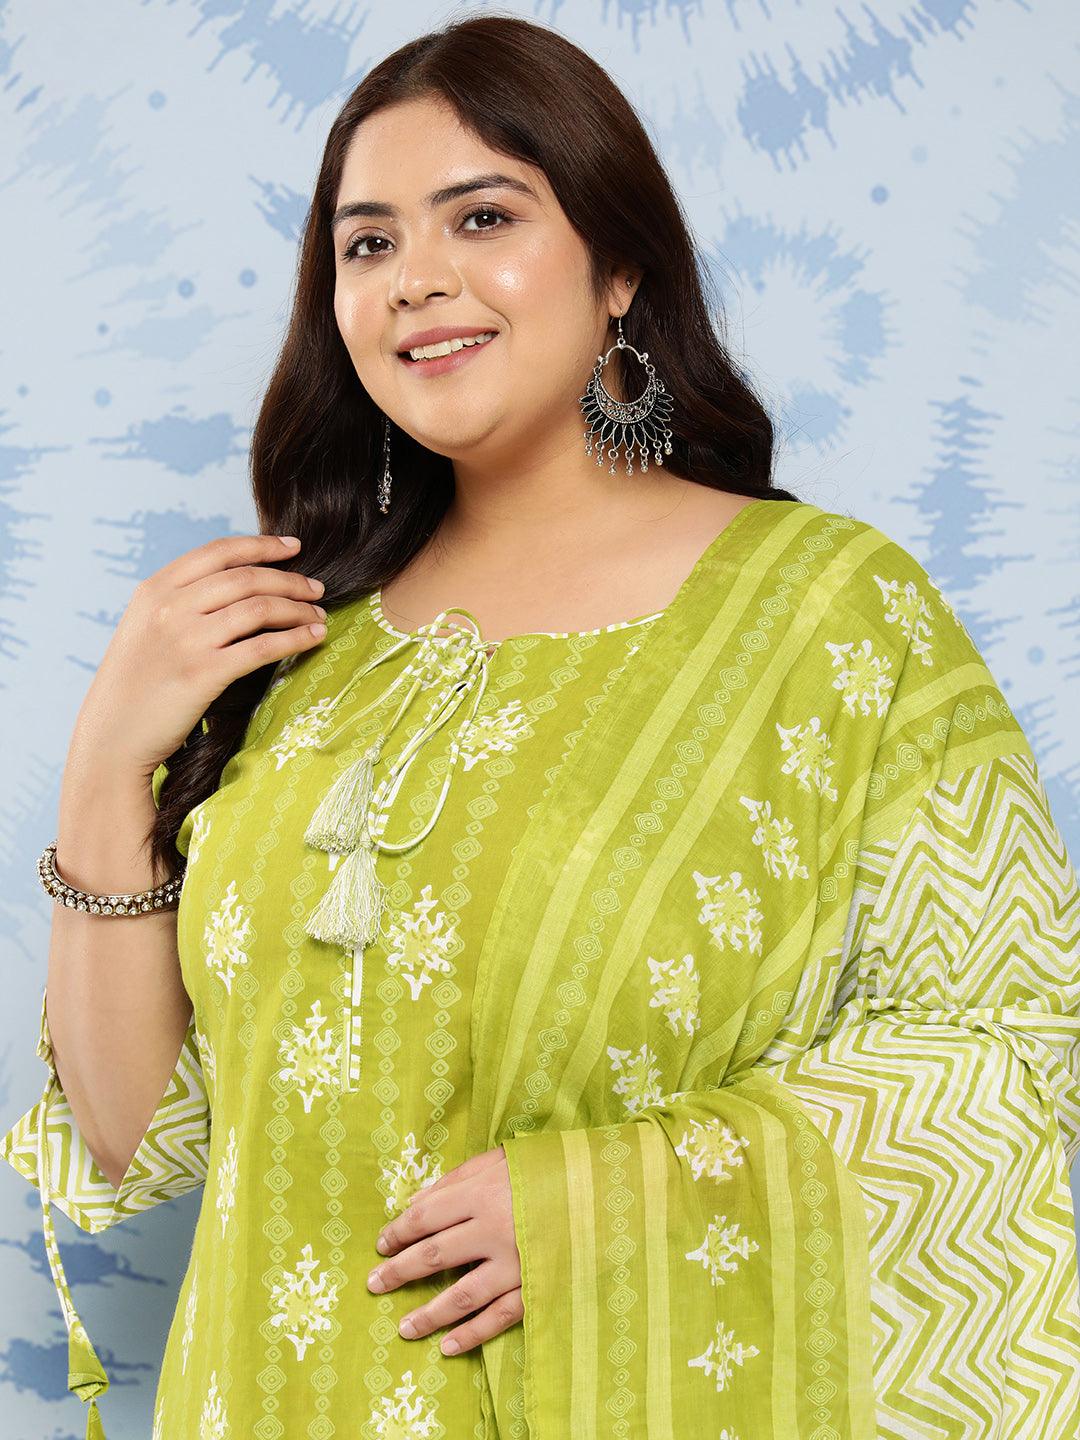 Lime Green Printed Cotton Straight Kurta With Trousers and Dupatta